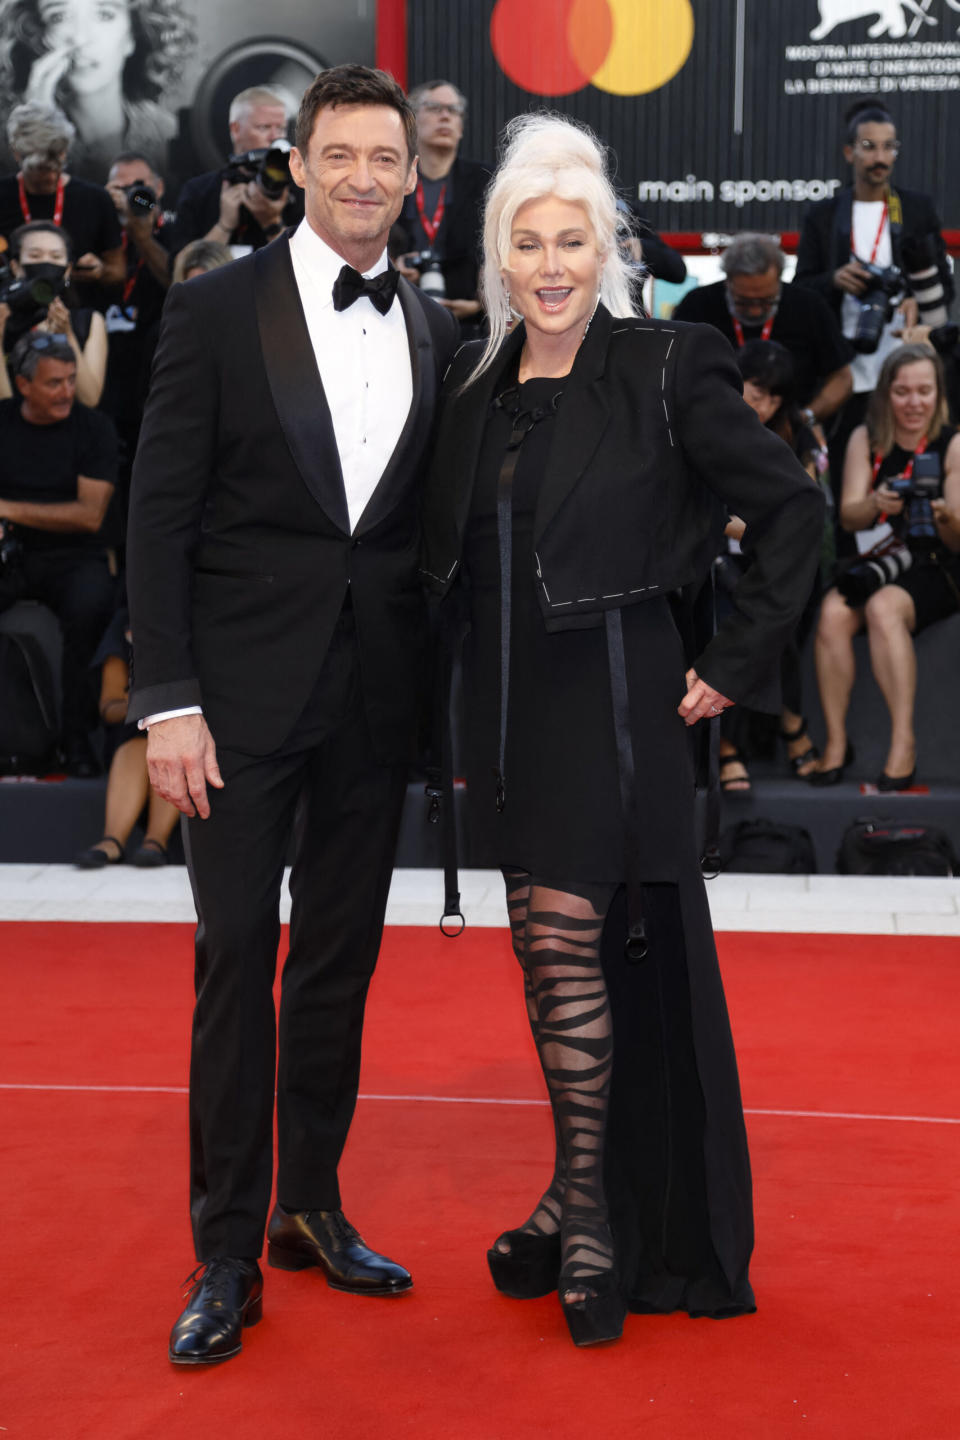 Hugh Jackman and Deborra-Lee Furness attend the premiere of 'The Son' during the 79th Venice International Film Festival at Palazzo del Cinema